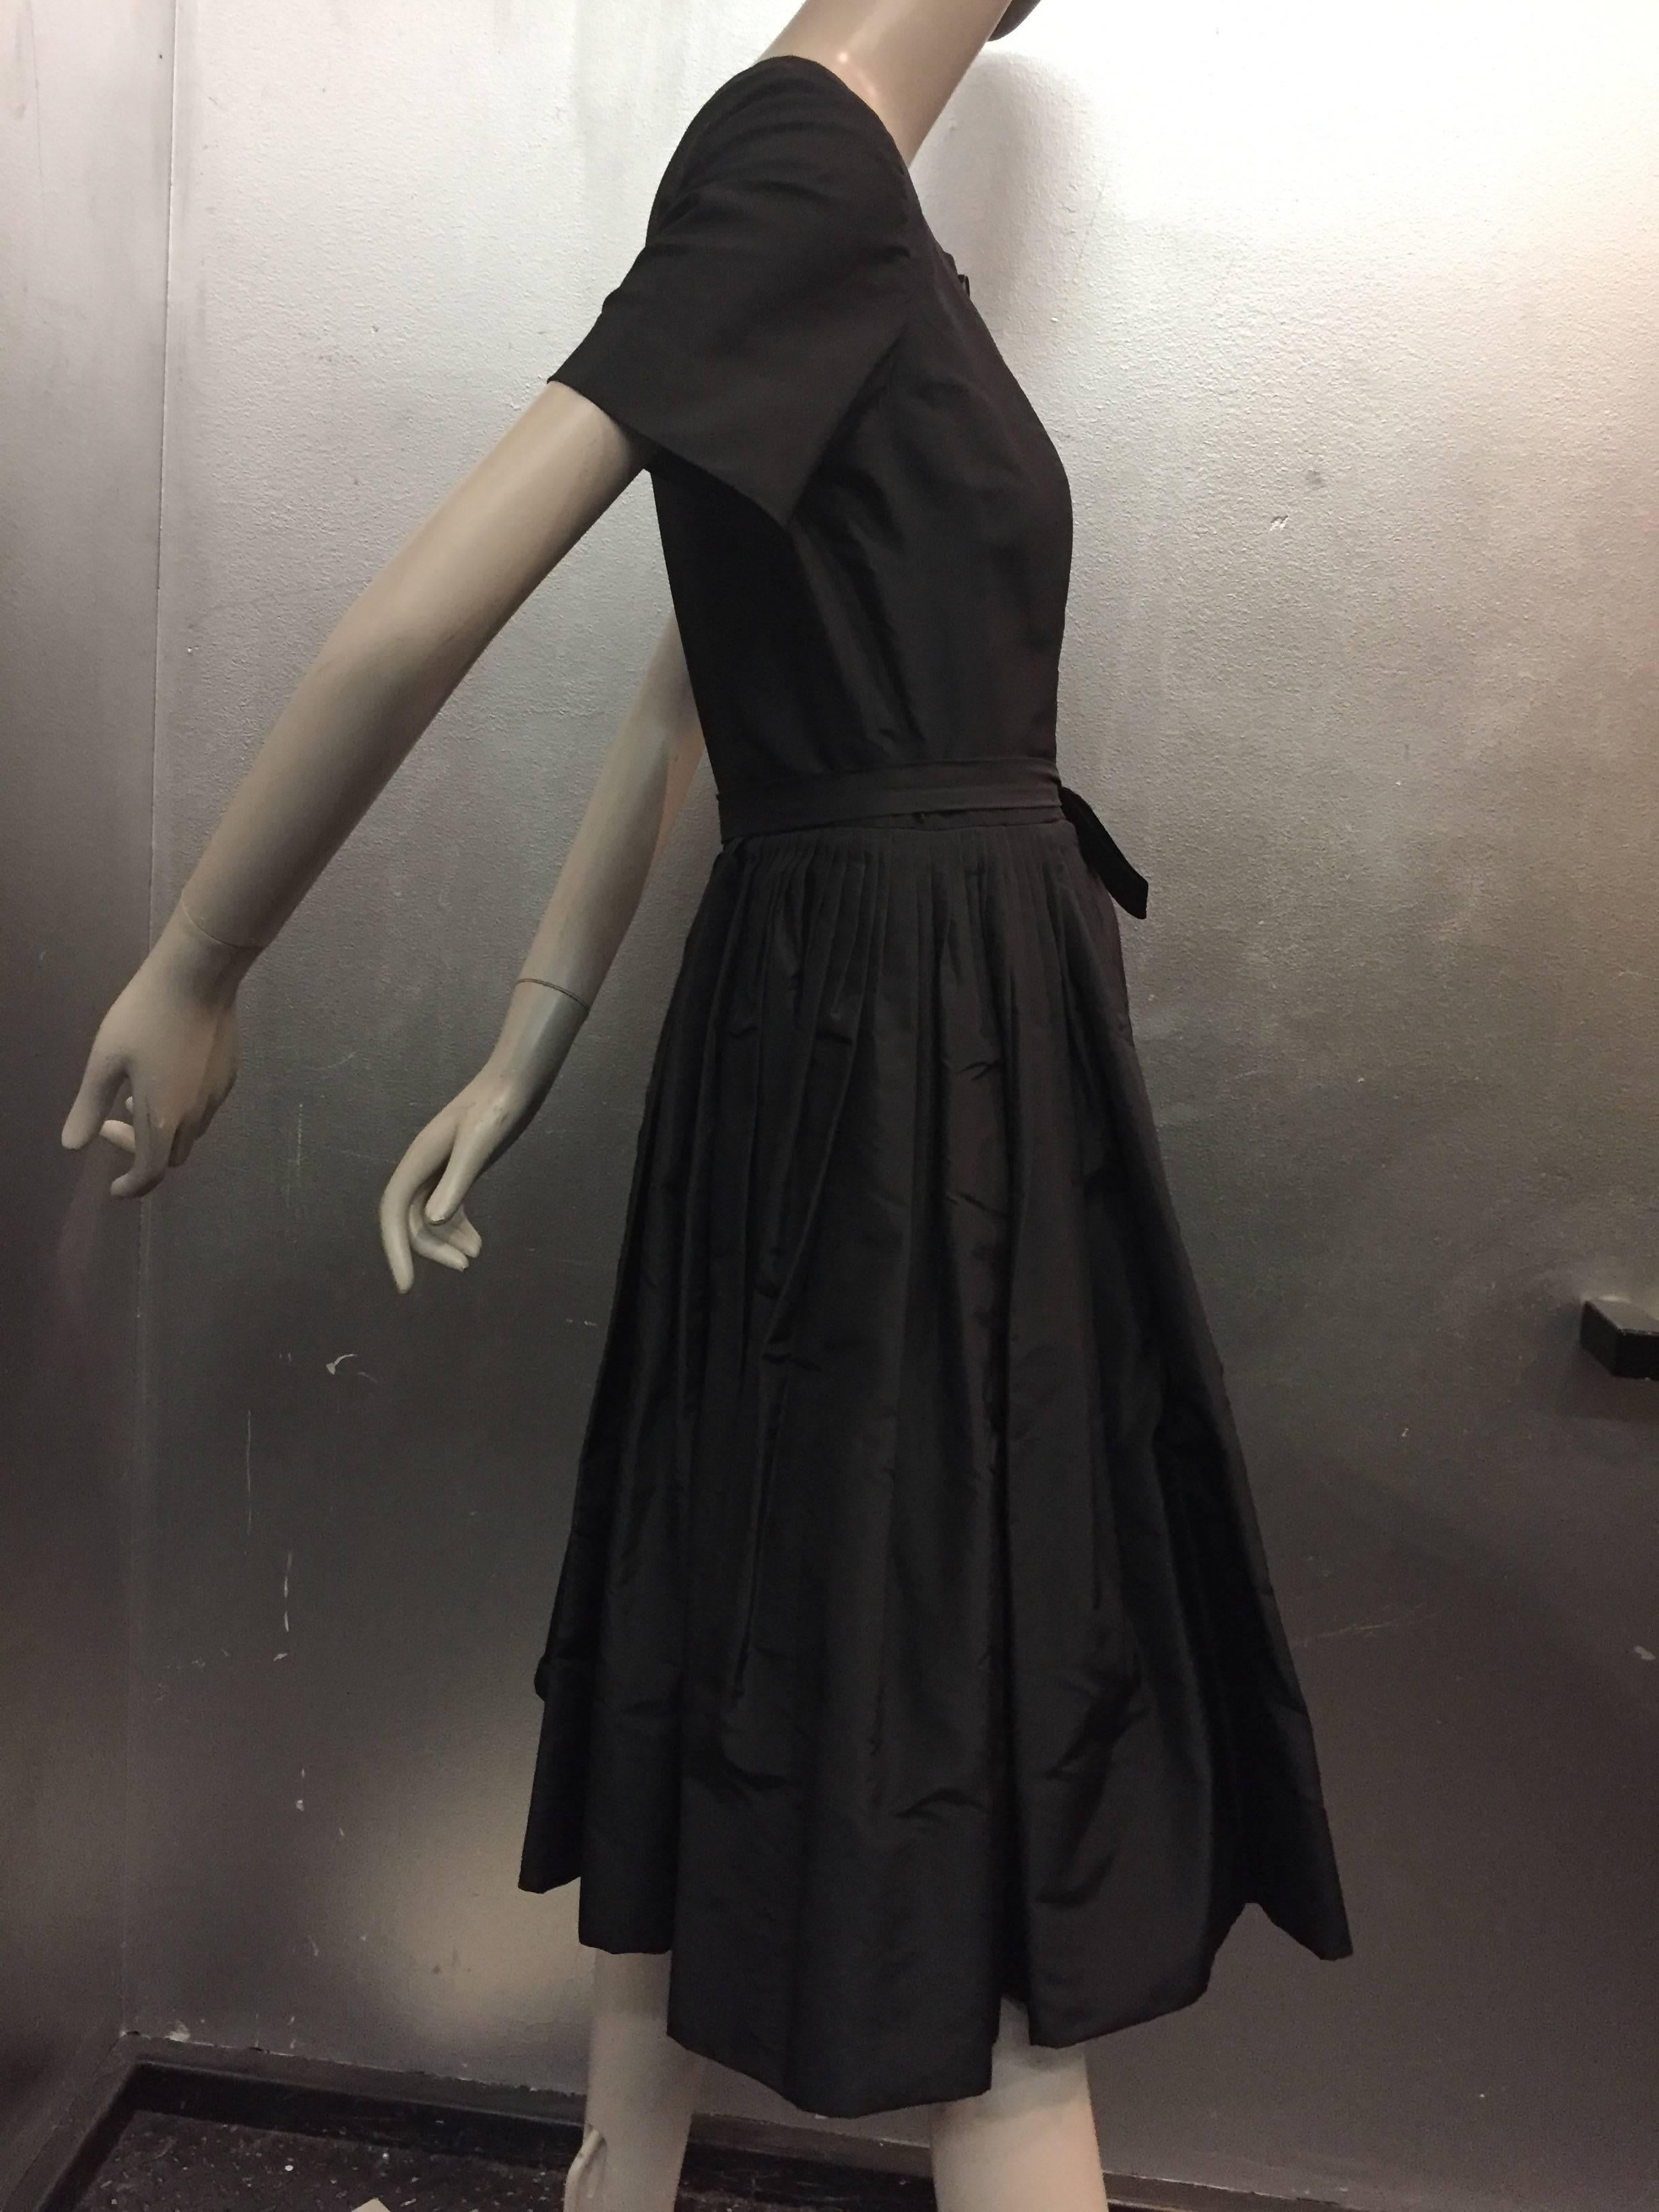 1950s Gustave Tassell Black Silk Cocktail Dress w Exposed Under-Skirt and Bow 2